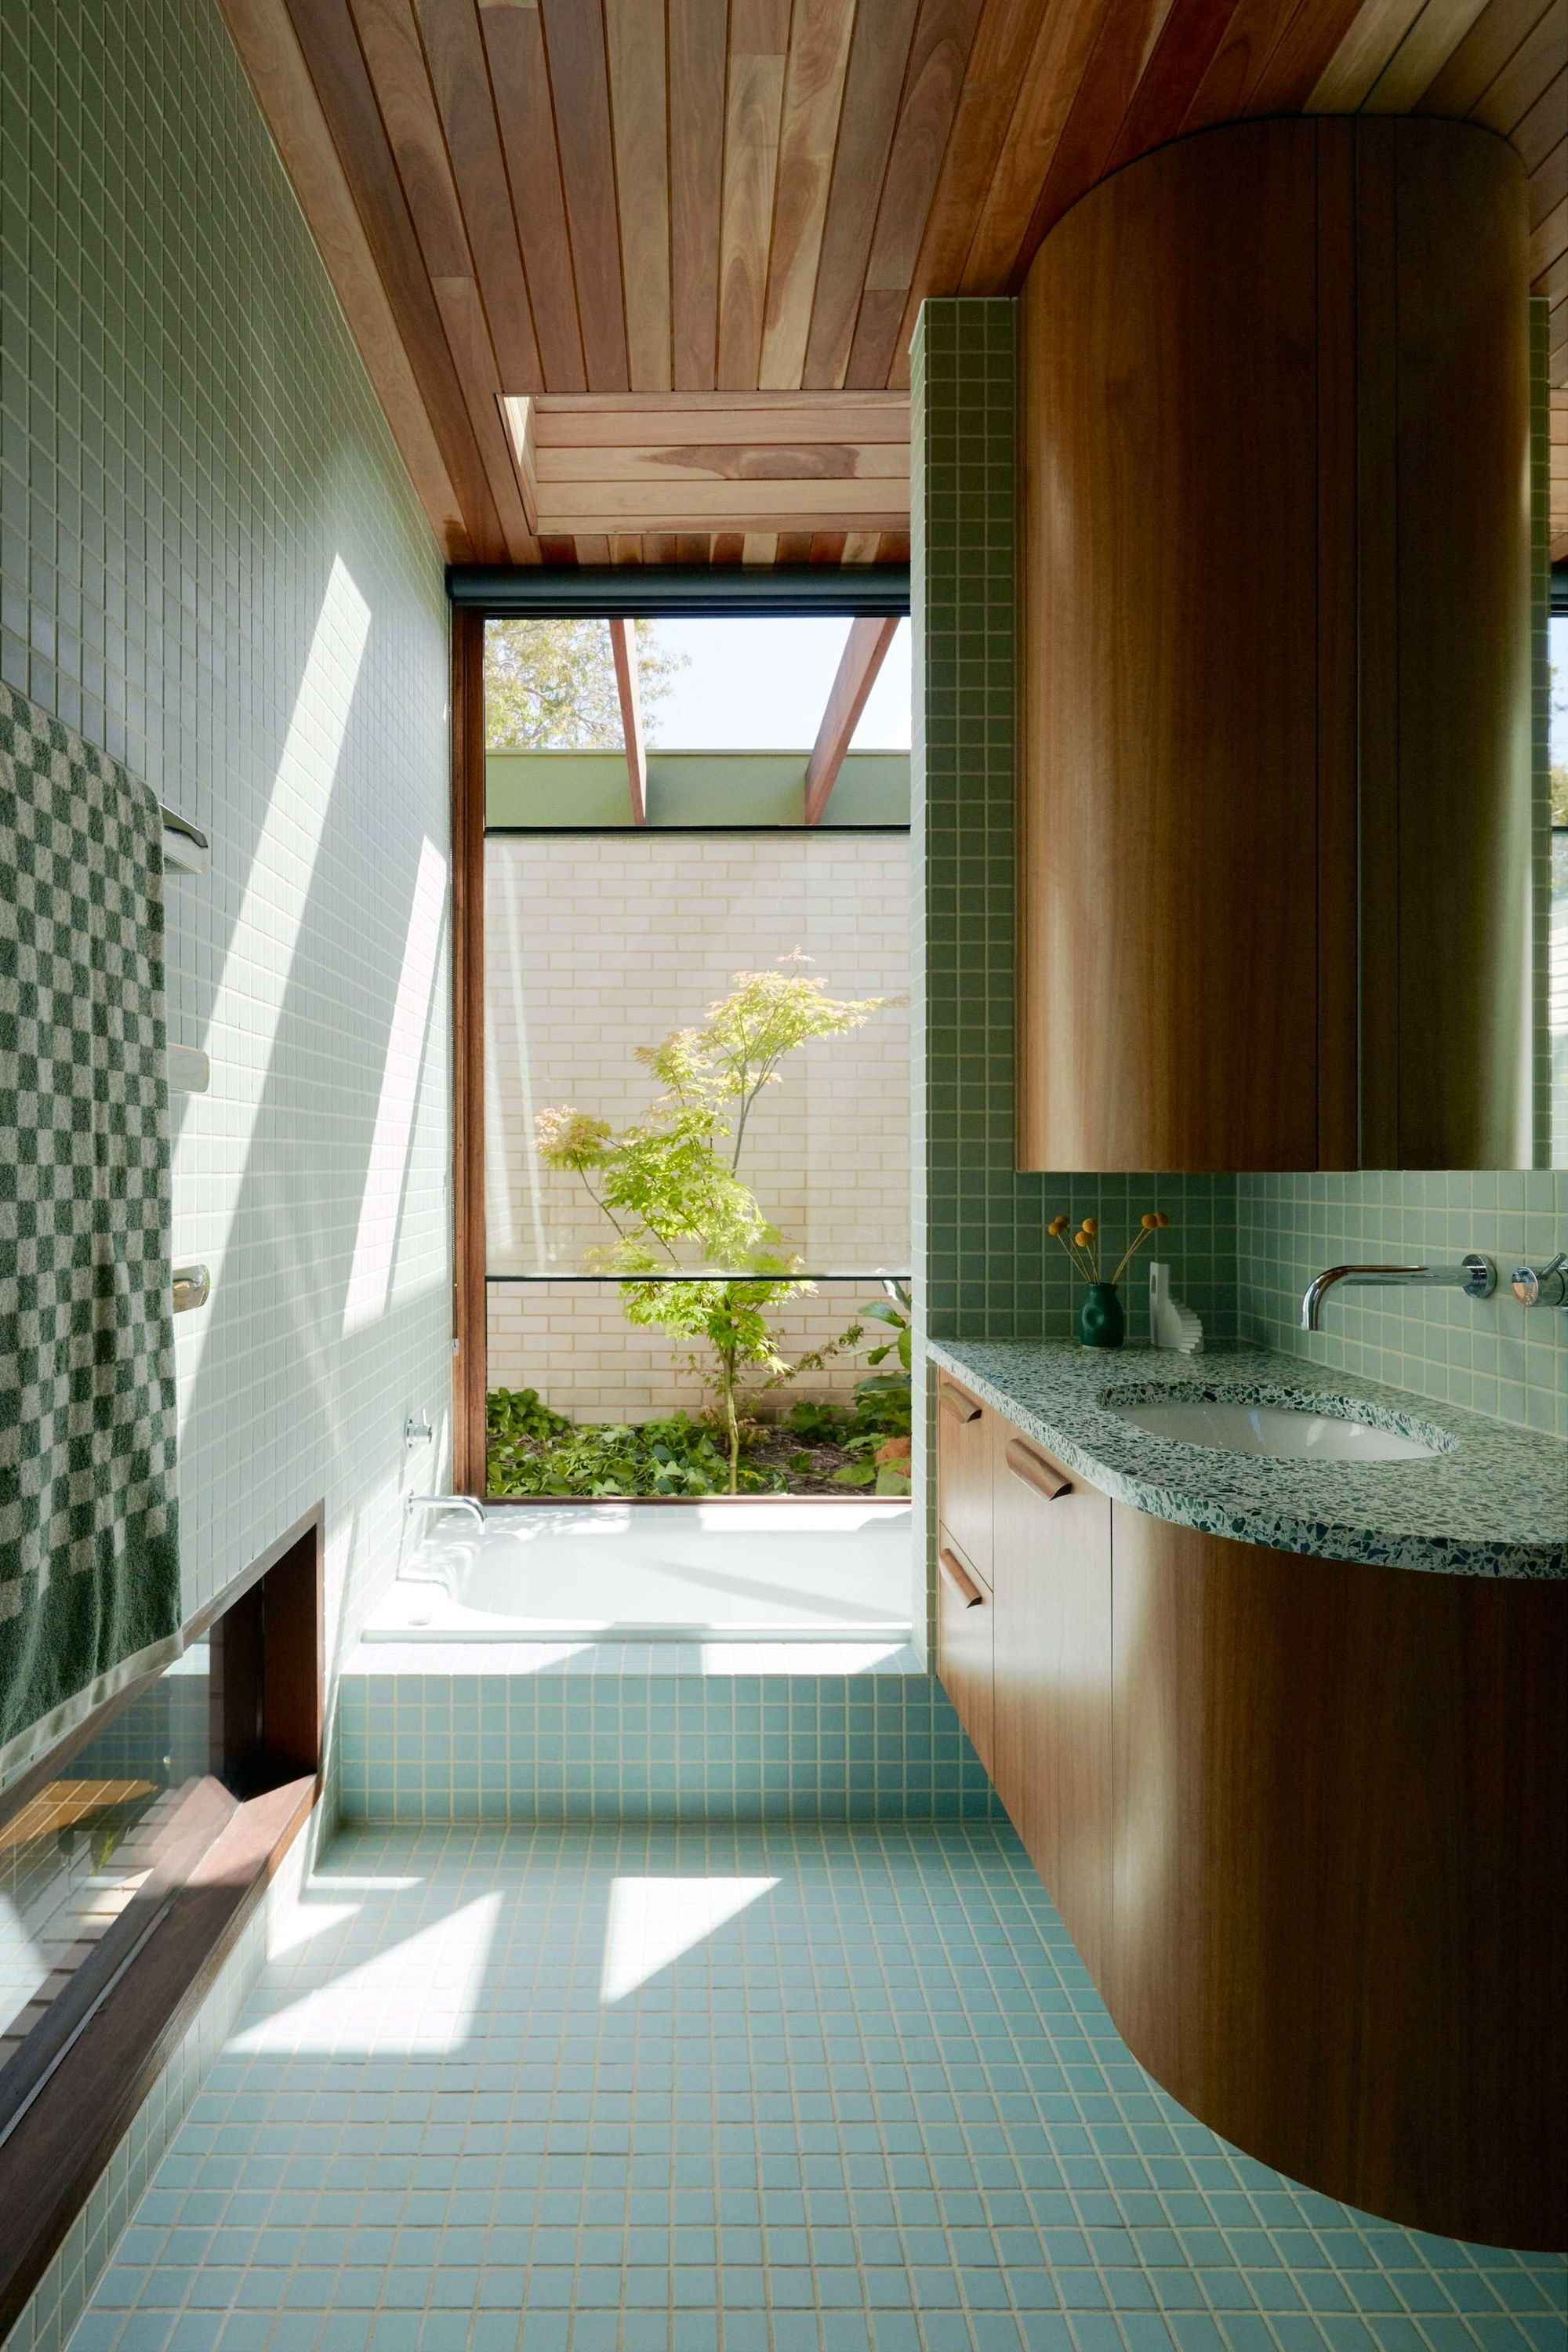 Florida House by Nest Architects with Placement Studio showing a green tile and timber bathroom with a garden outlook